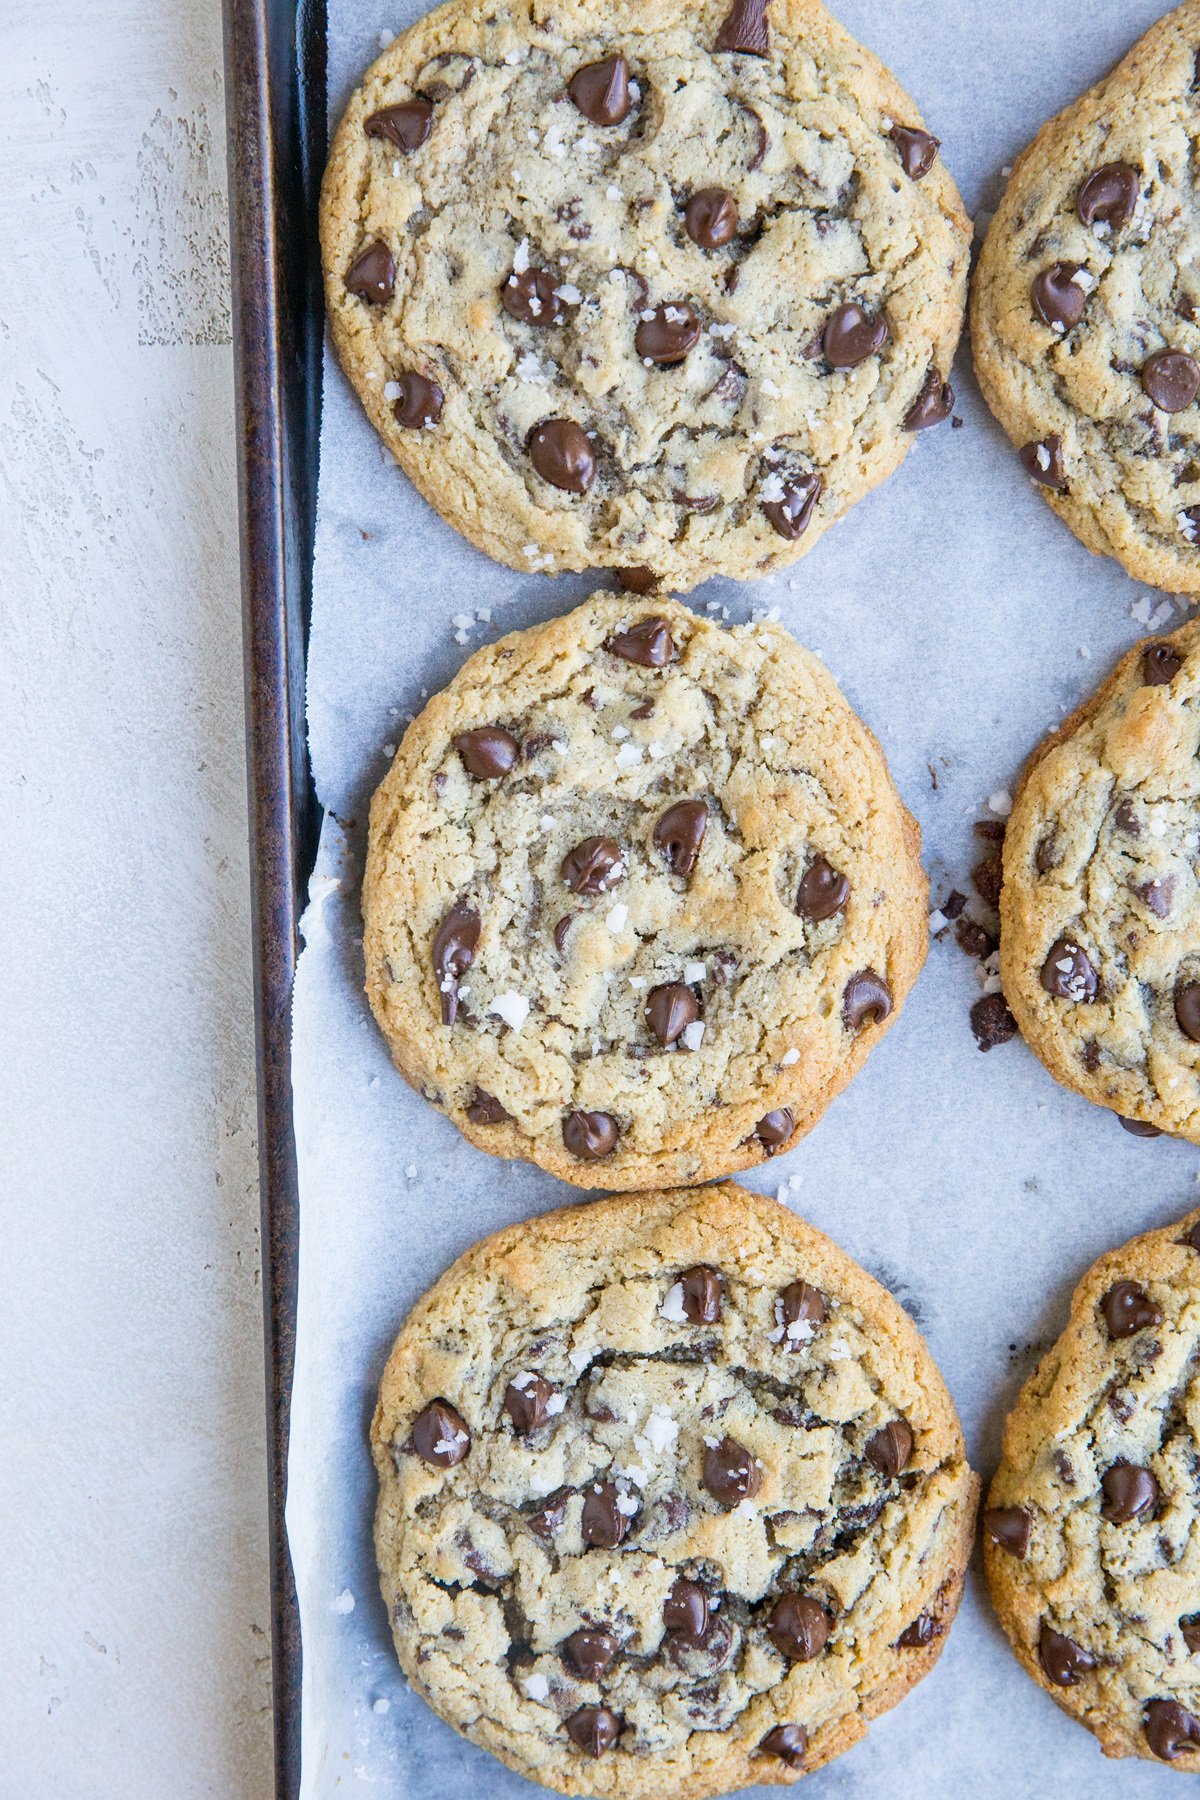 Giant Keto Chewy Chocolate Chip Cookies made grain-free and sugar-free. Large, ultra gooey and delicious cookies!